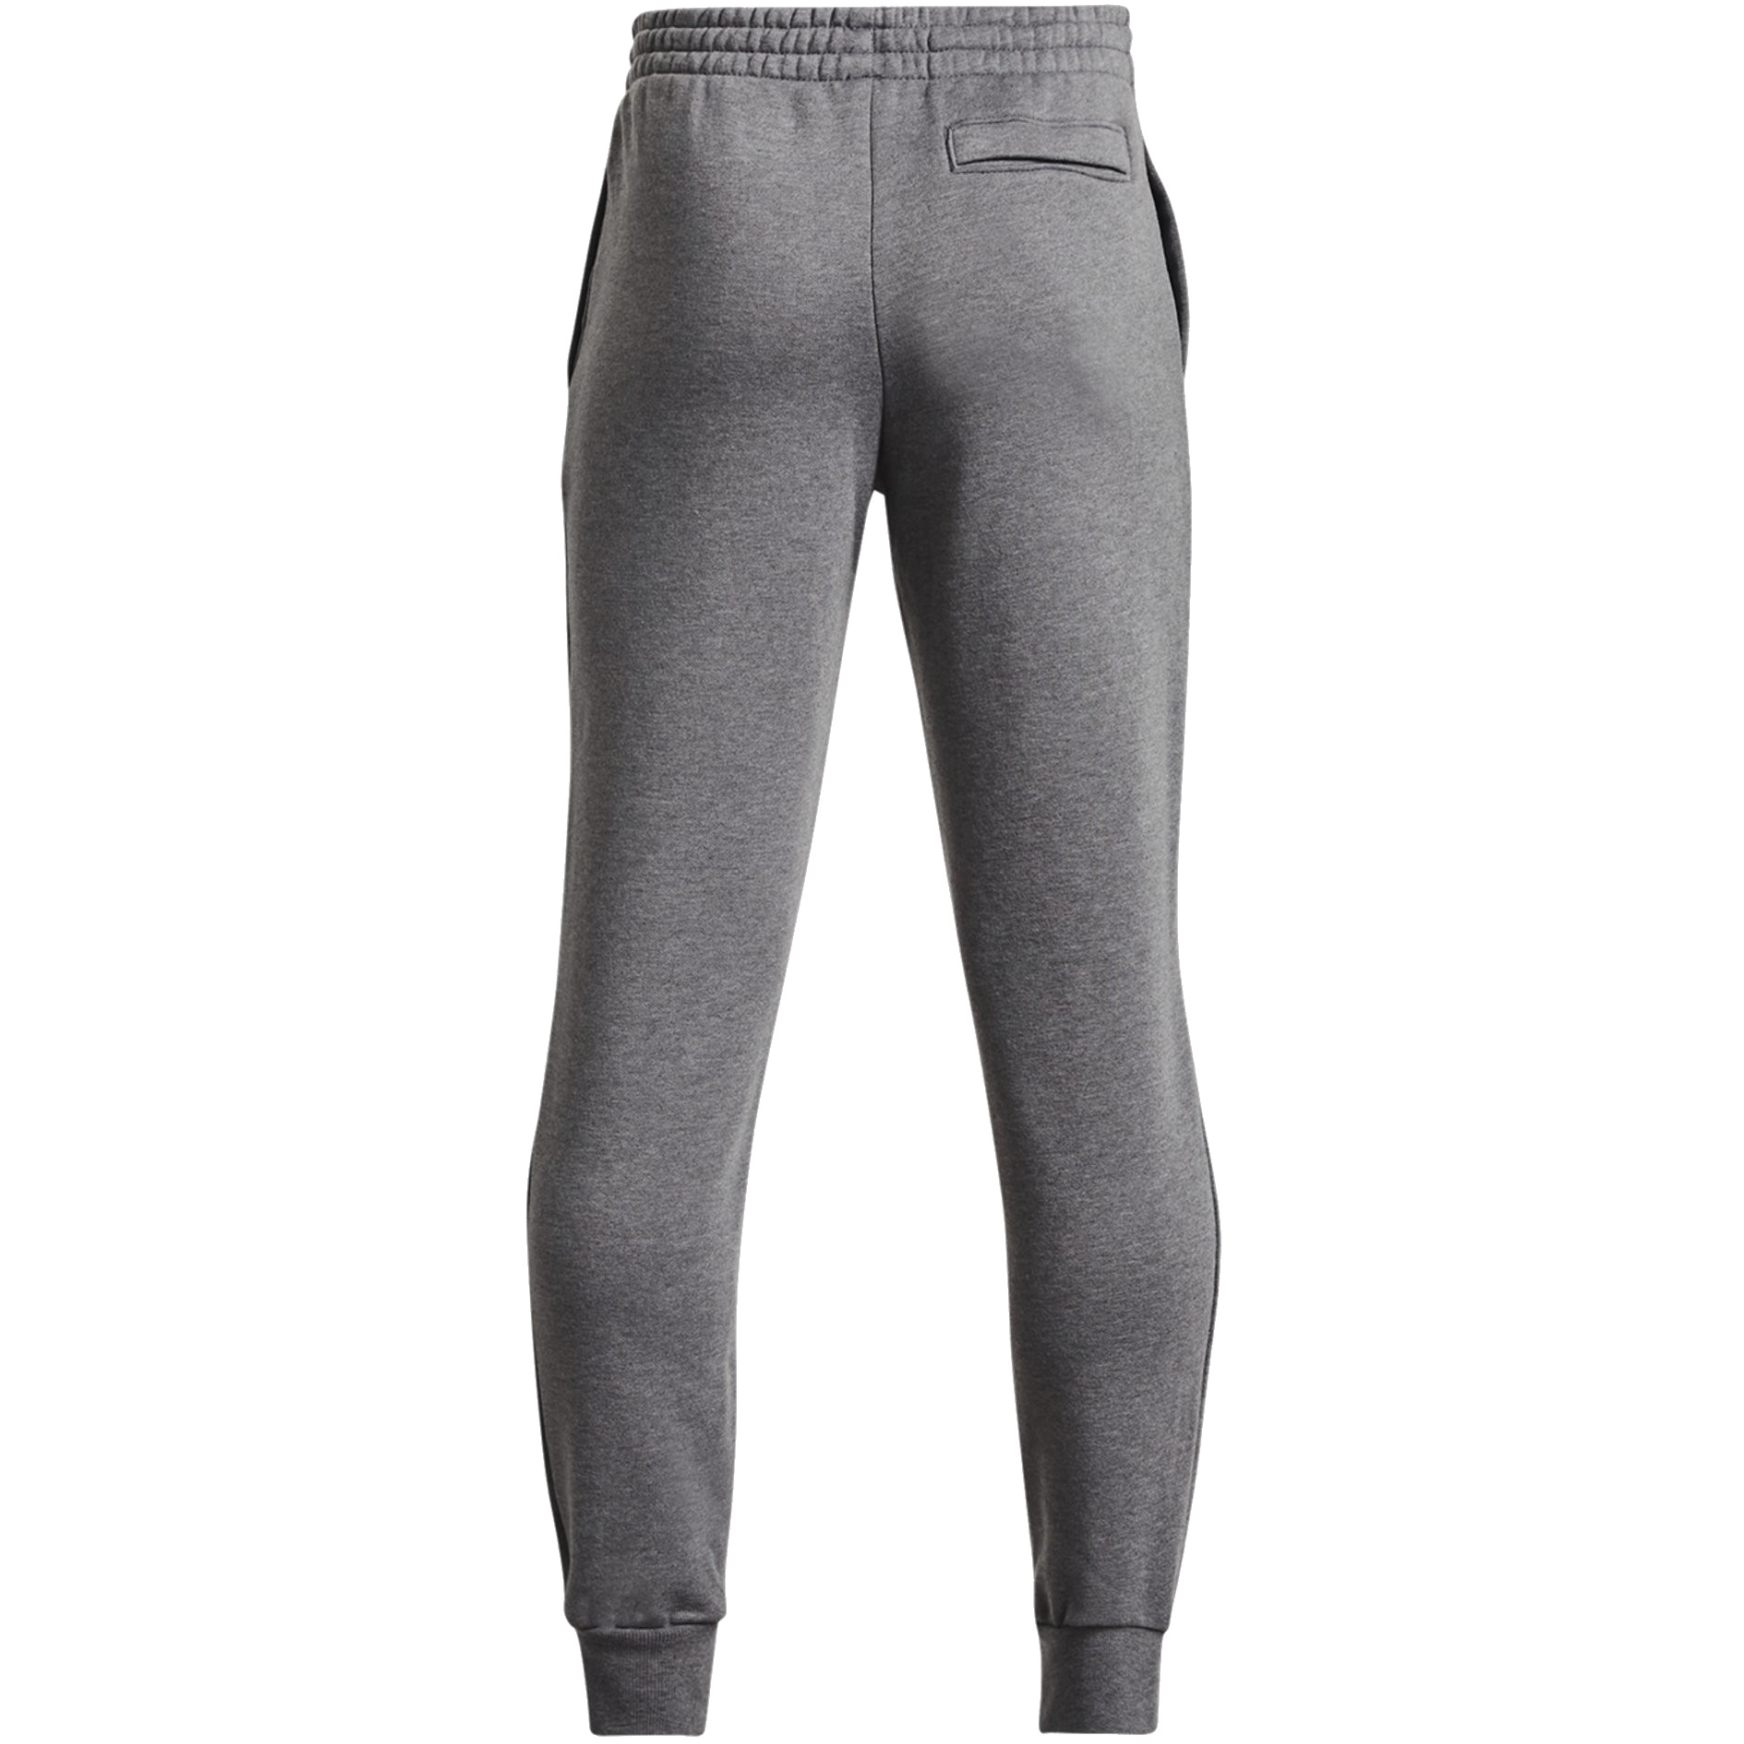 Under Armour, Pants, Under Armour Mens Rival Fleece Sweat Pants S Small  Pitch Gray Light Heather